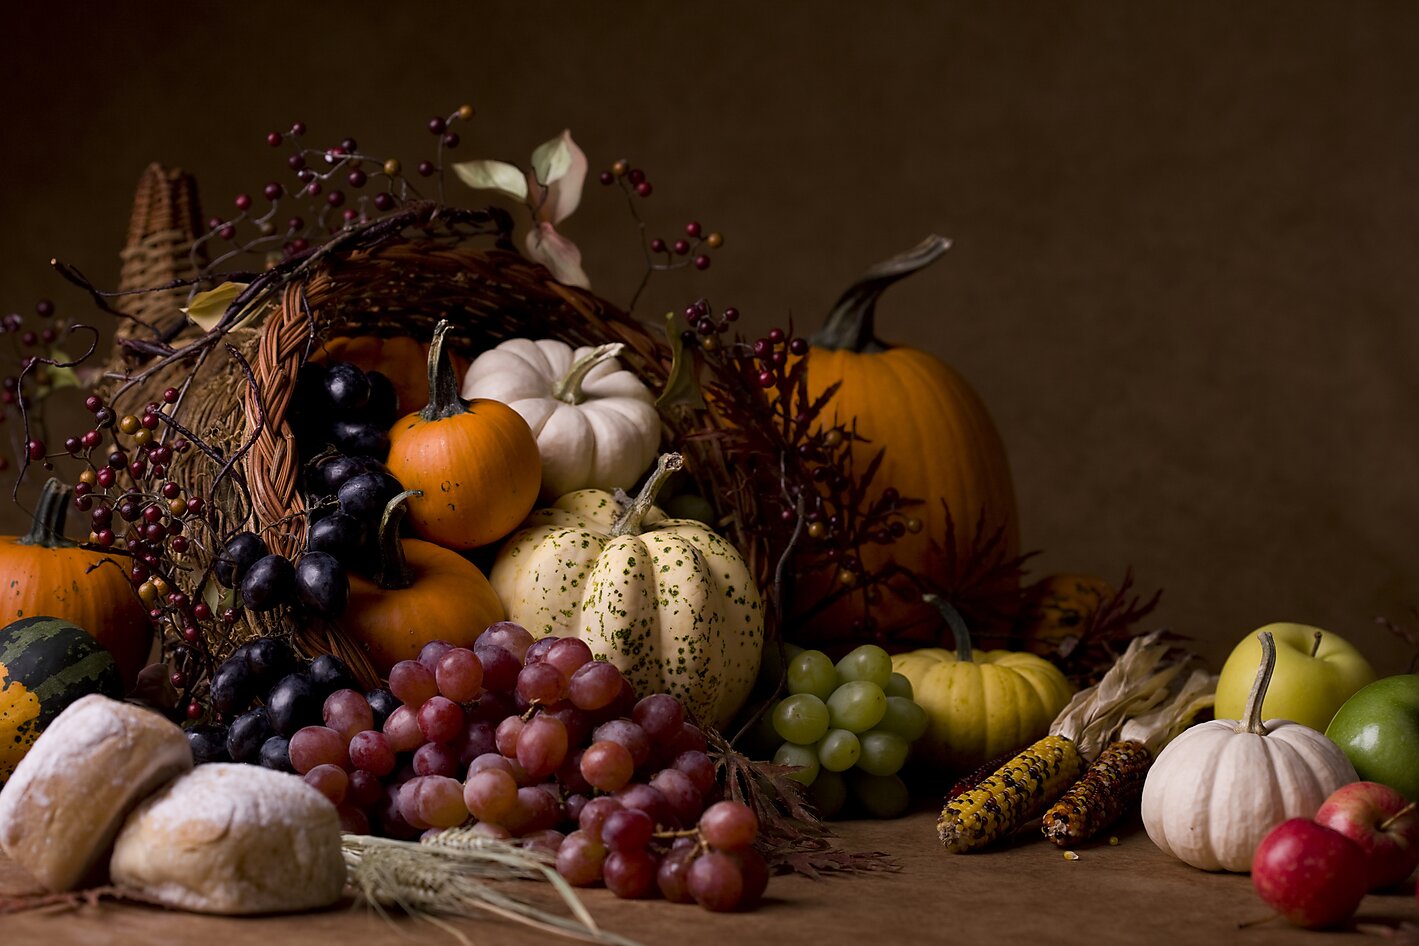 Cornucopia with soft and subtle lighting on a soft golden brown background